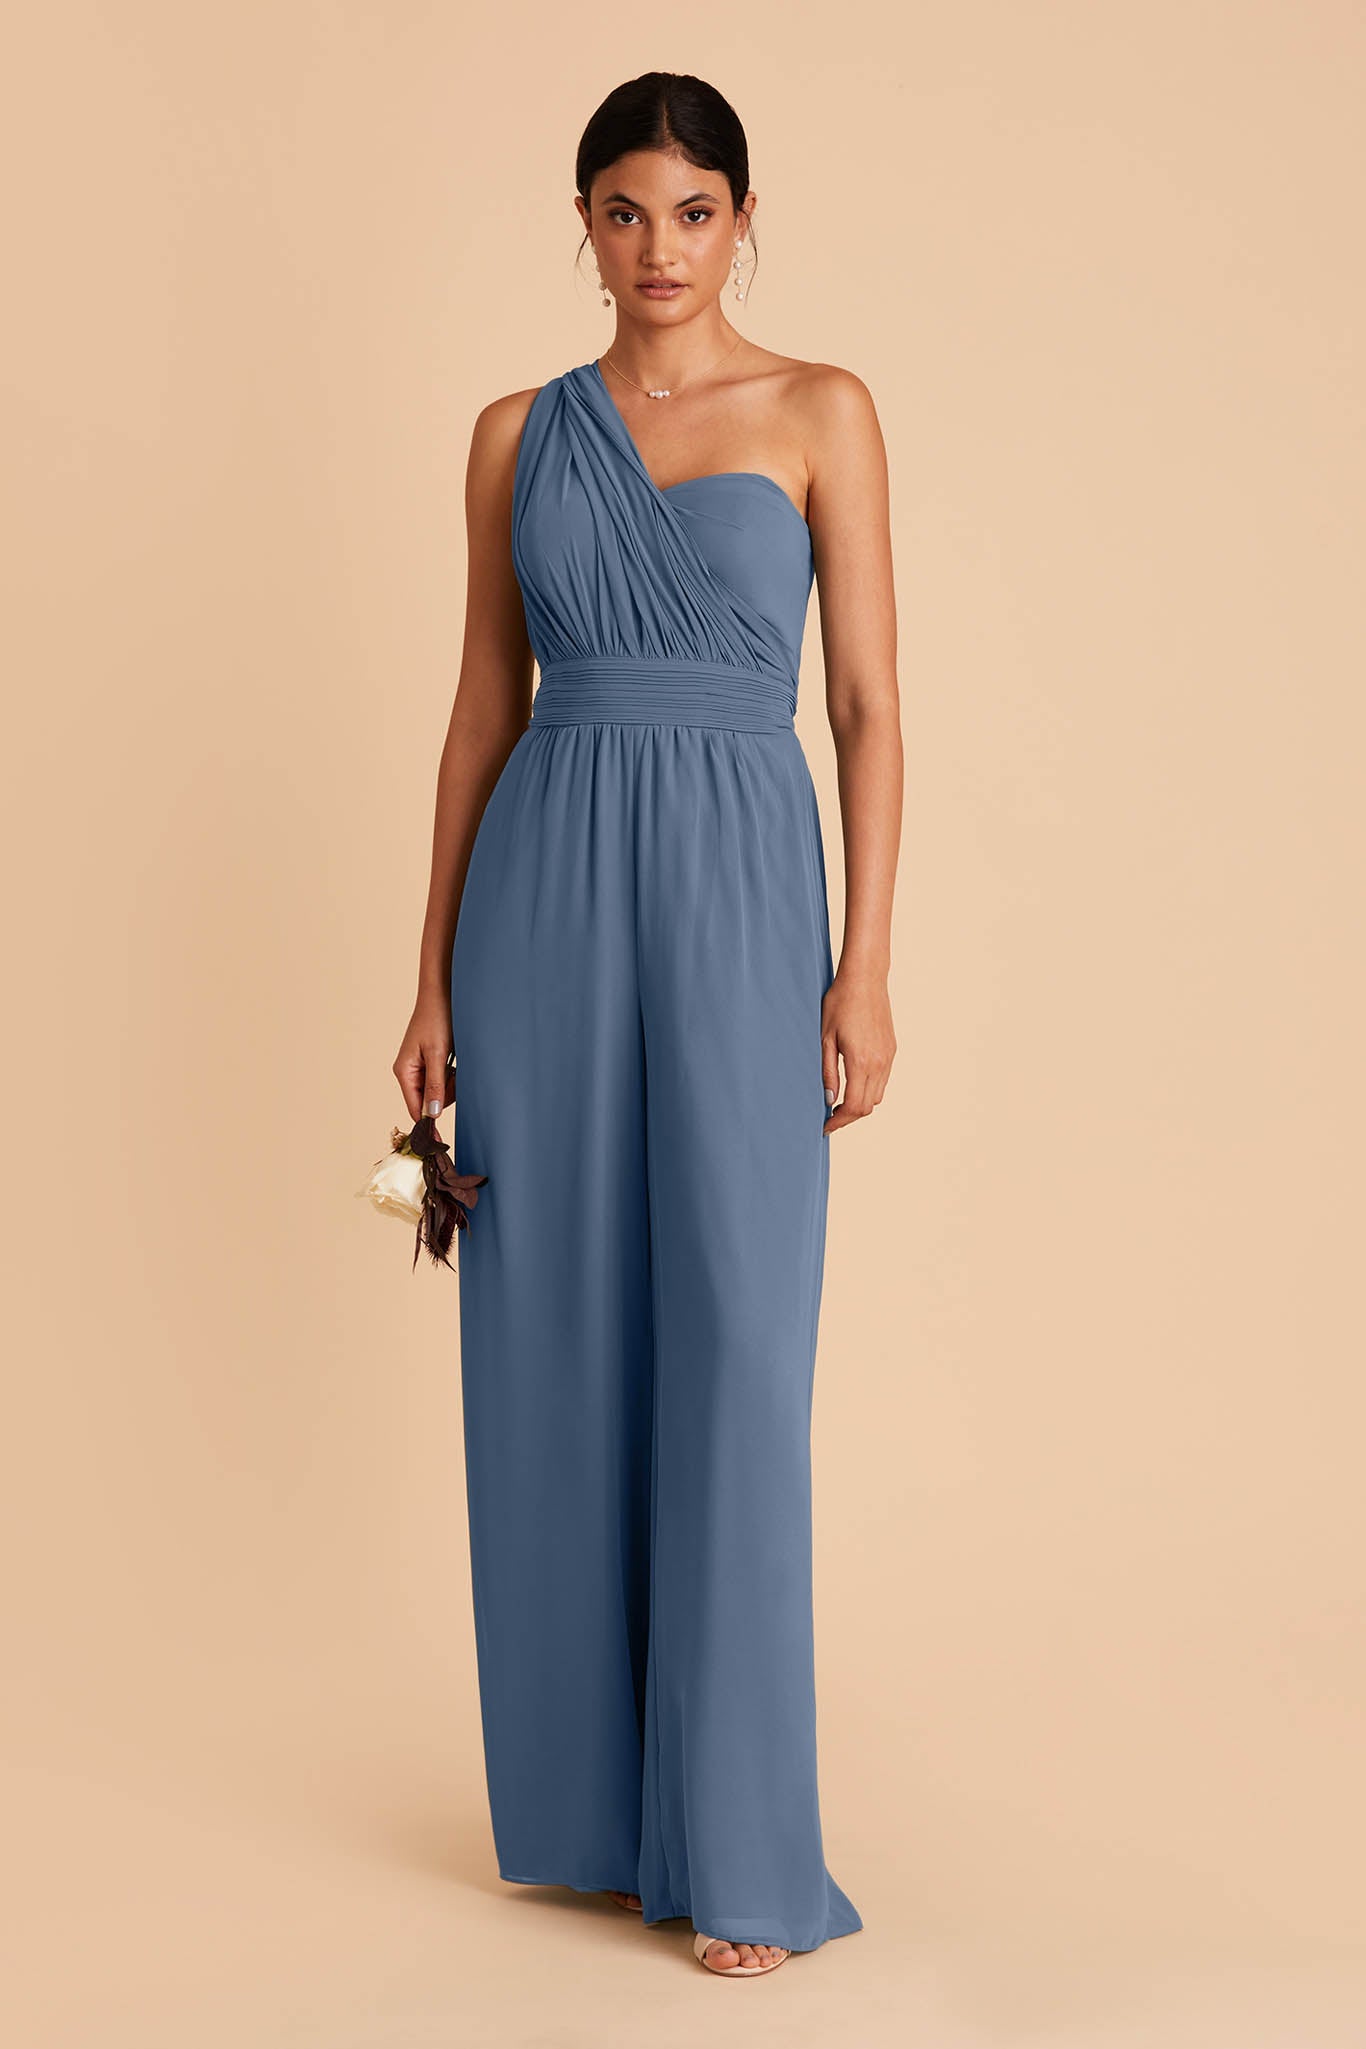 Medium blue wedding jumpsuit with sweetheart bodice with convertible neckline